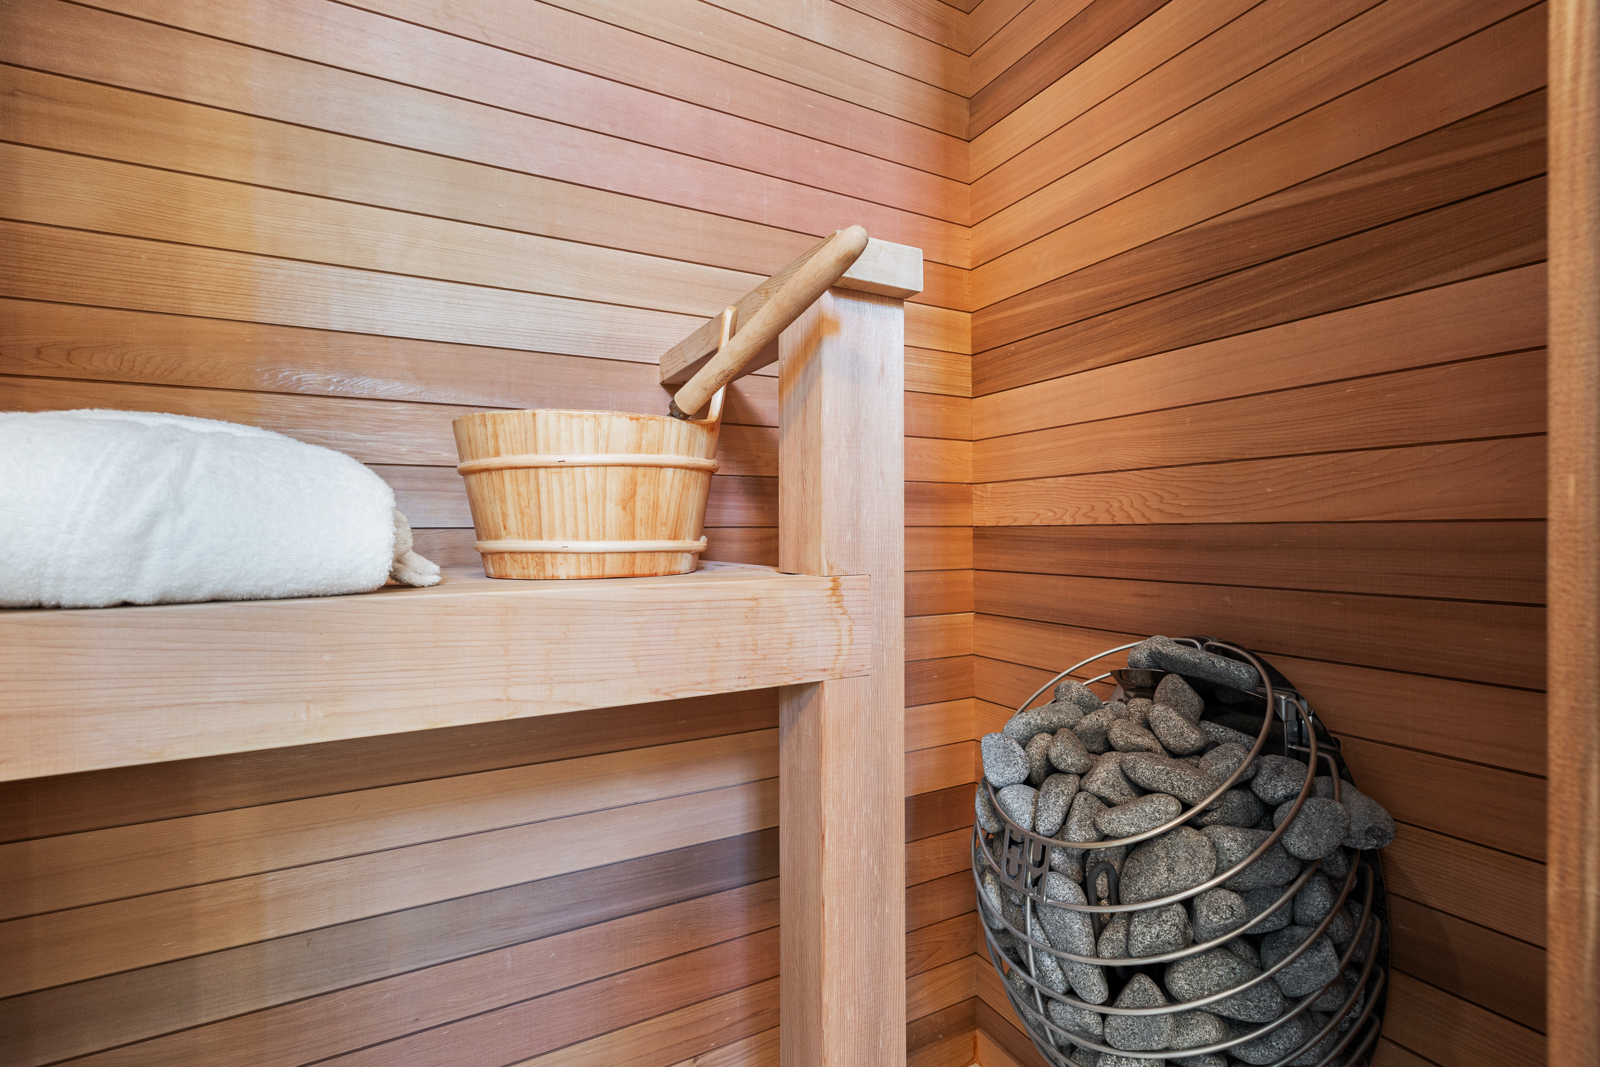 Who wouldn't love a sauna in their Primary Bath?